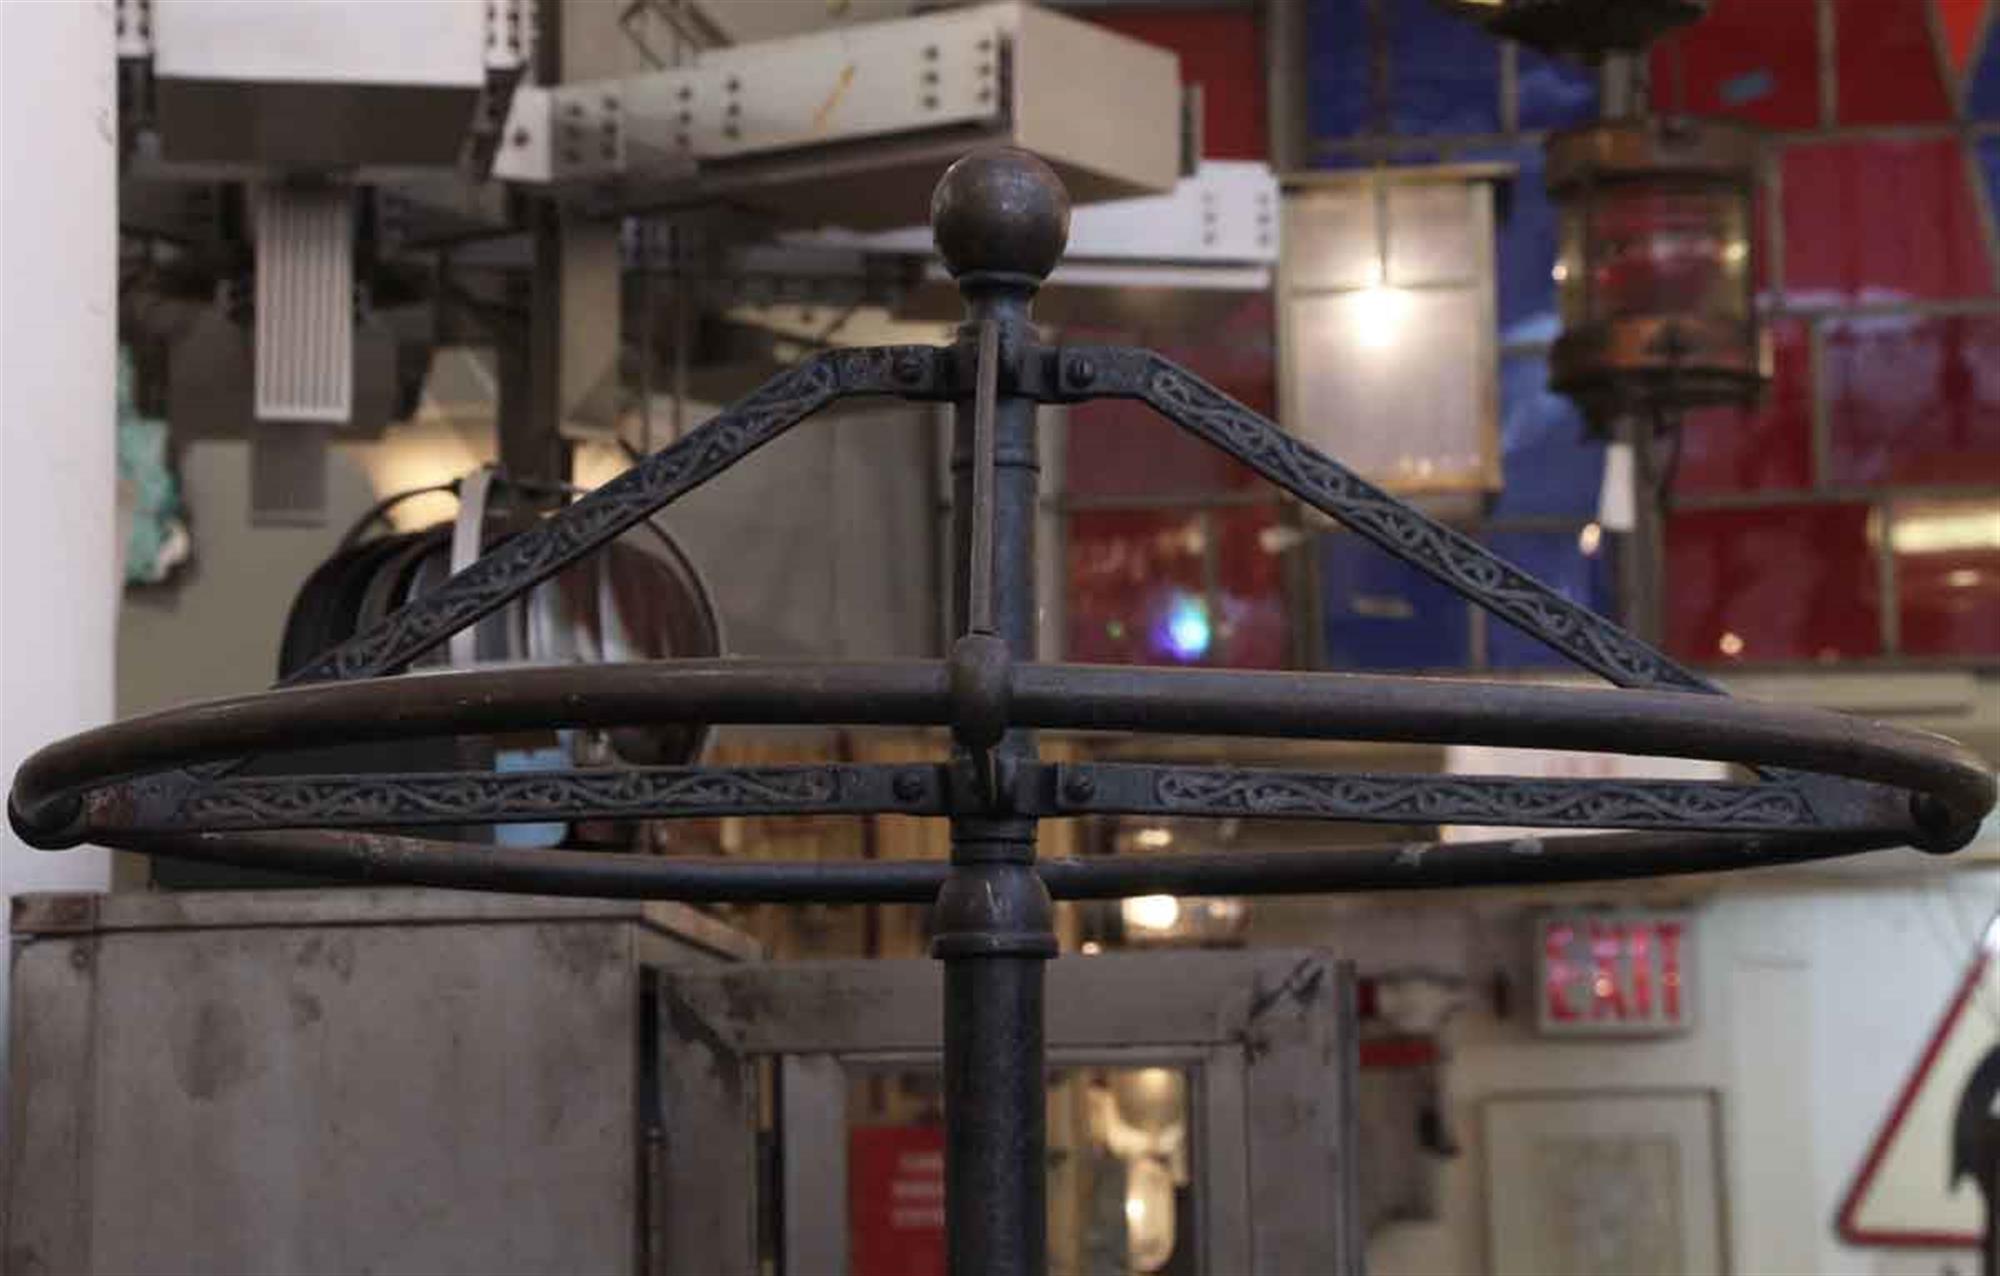 Circular cast iron spinner or rotary clothes rack from the 1900s. This can be seen at our 5 East 16th St location on Union Square in Manhattan.